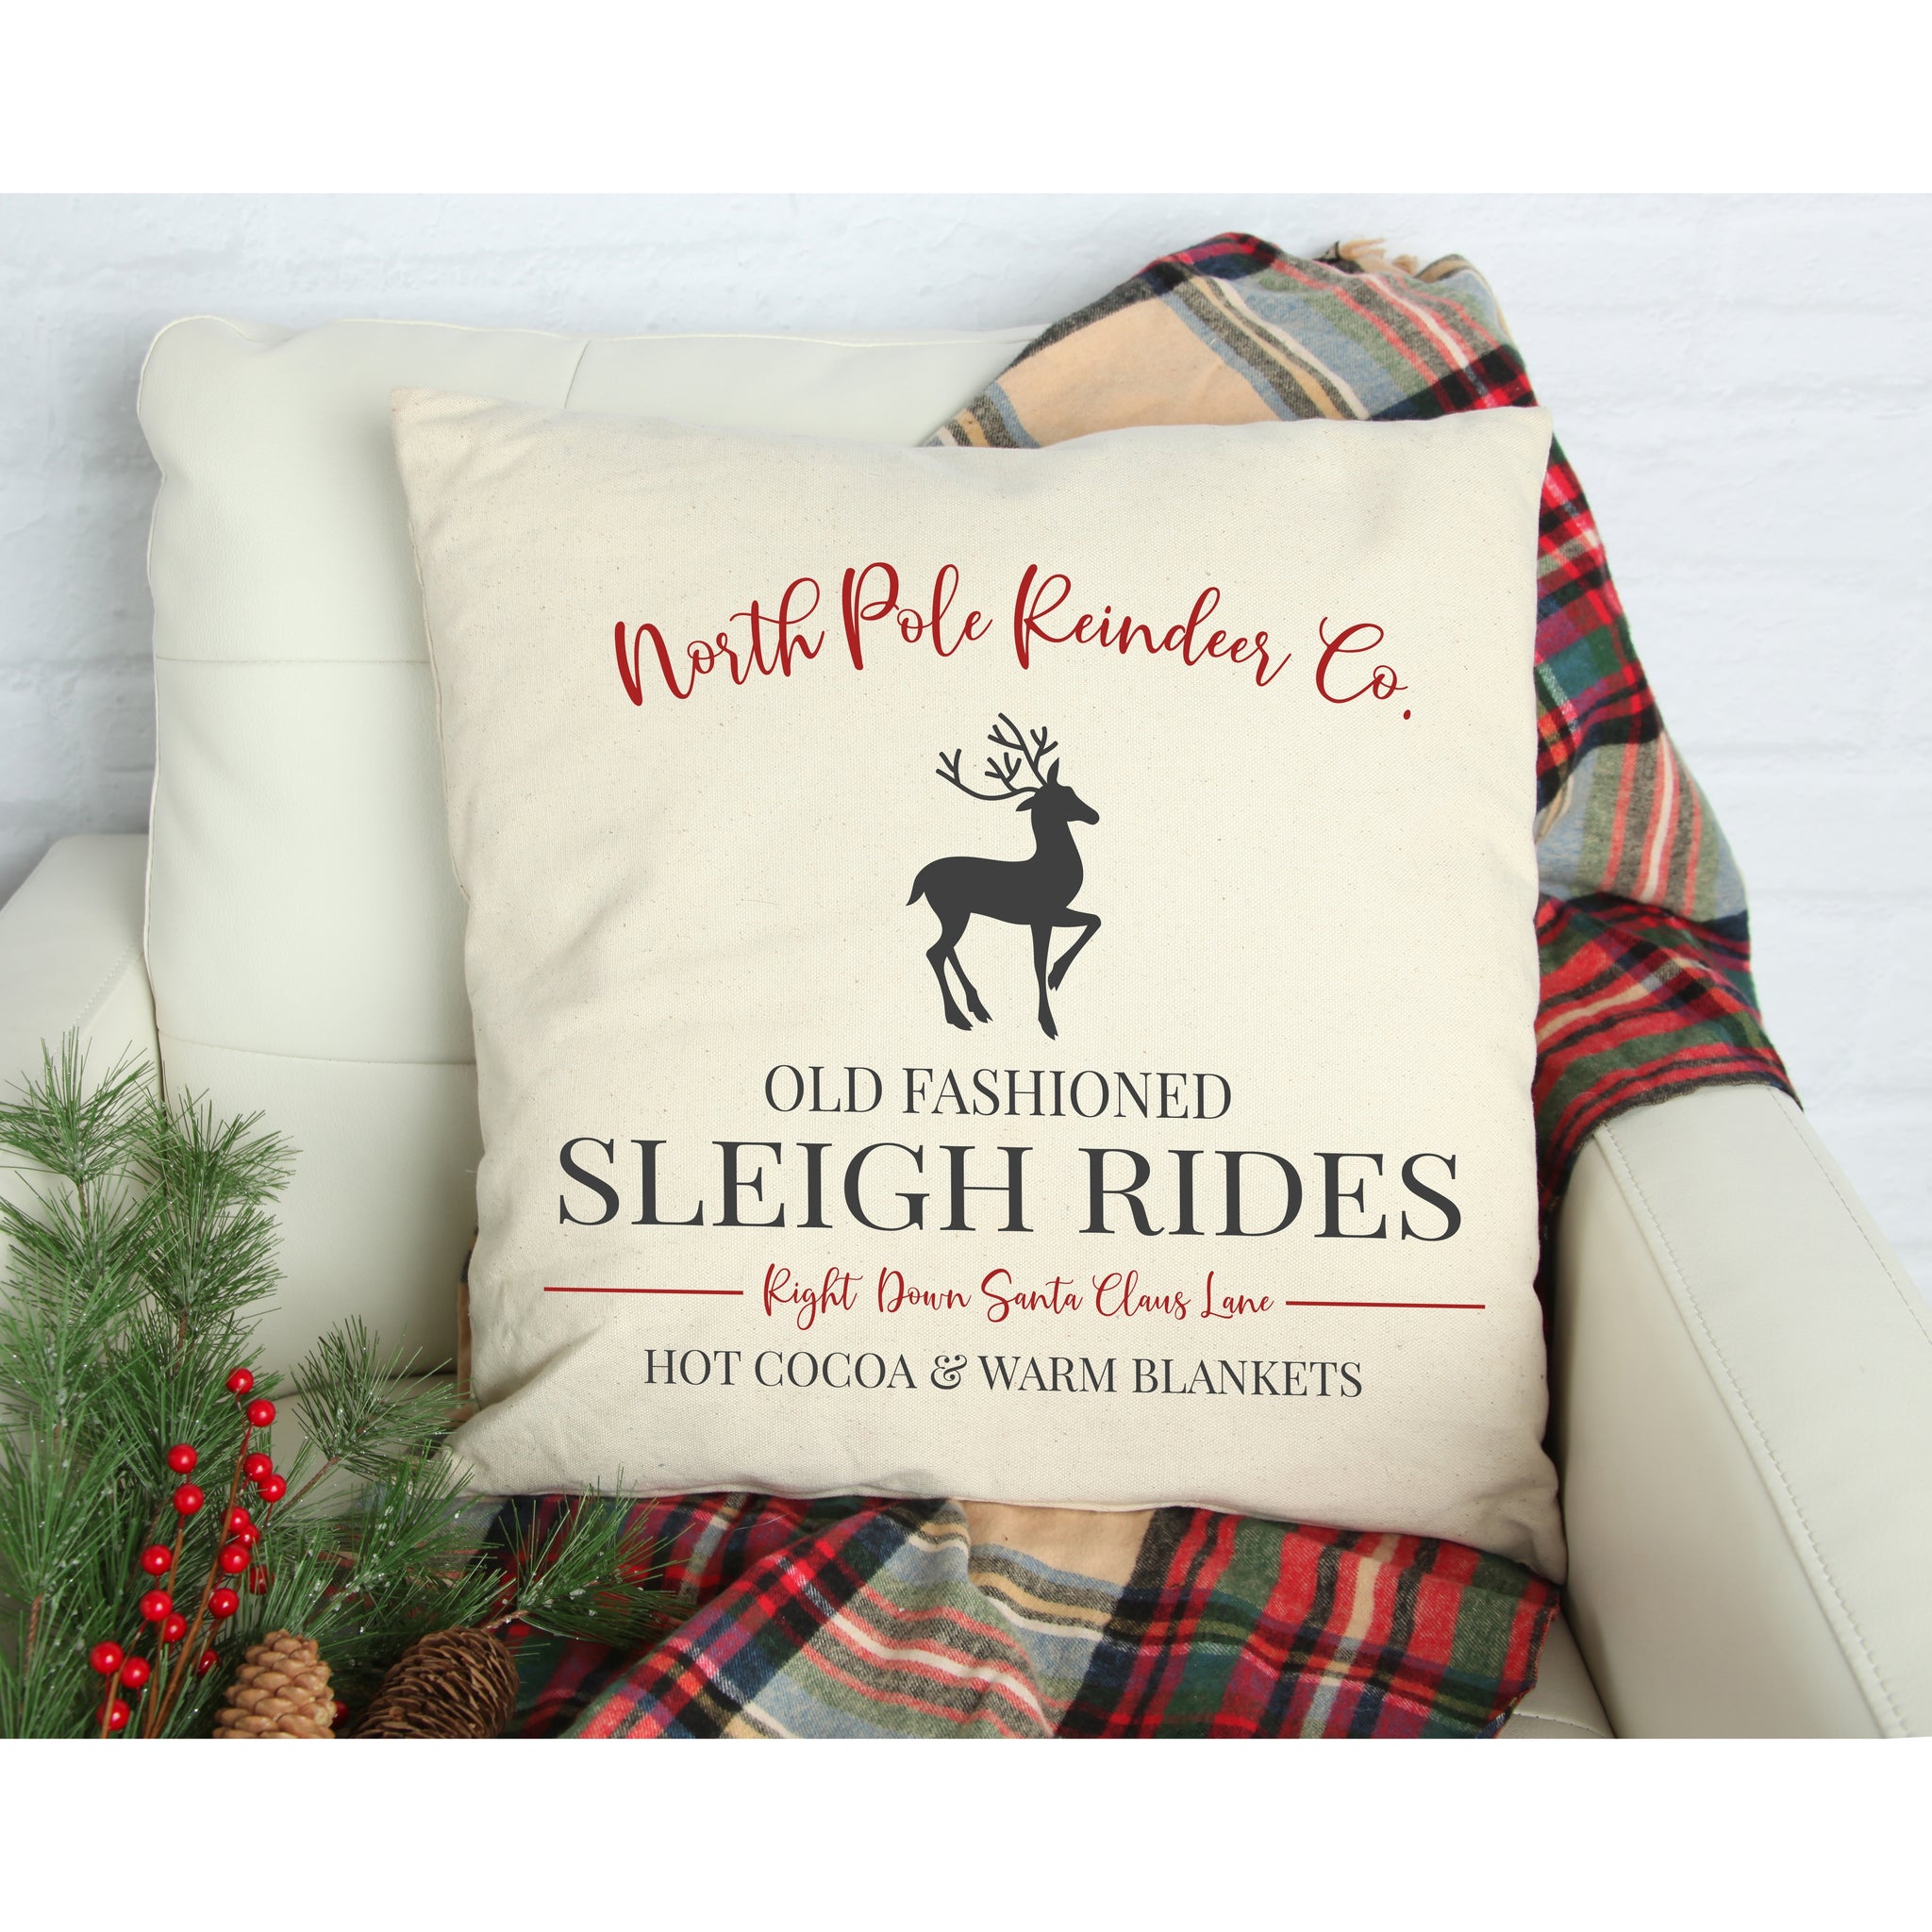 Old Fashioned Sleigh Rides Pillow Cover. 17 x 17”